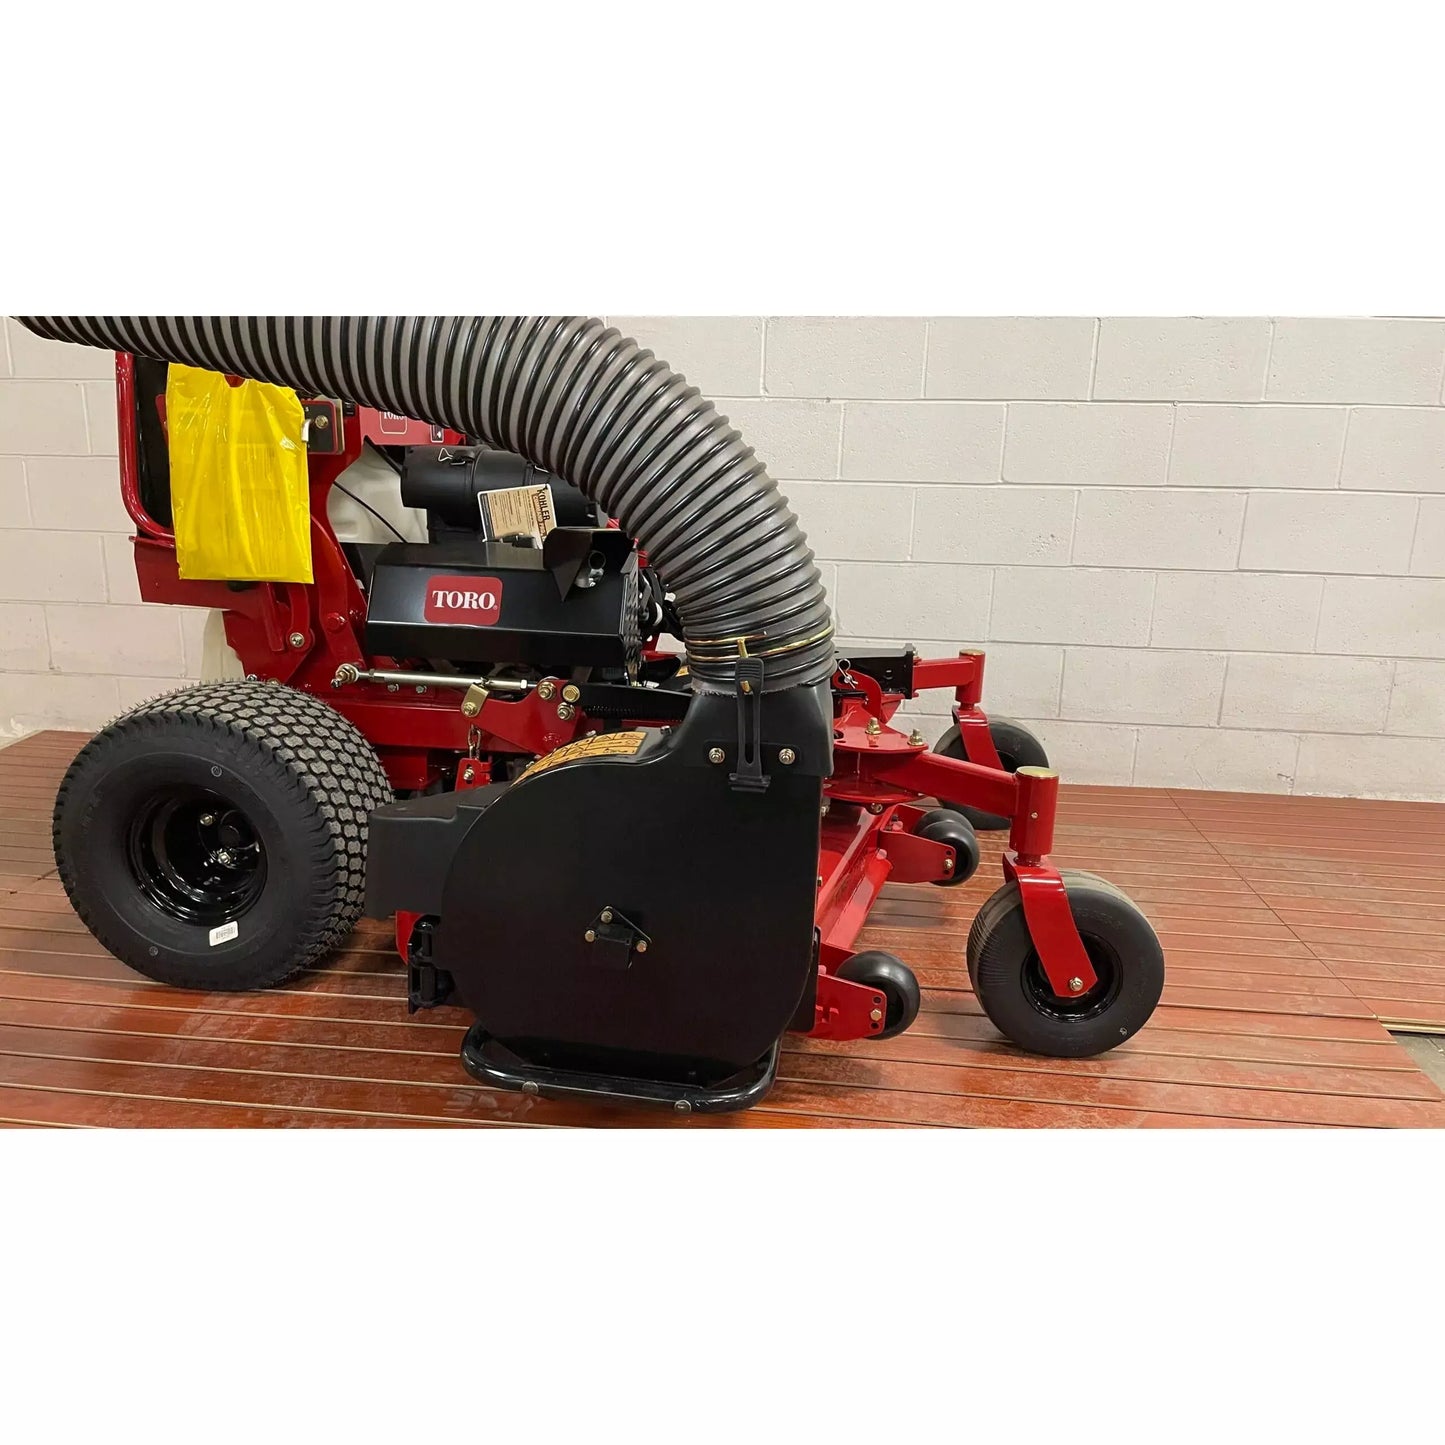 GrandStand E-Z Vac Blower & Drive Kit for 60 in. Deck